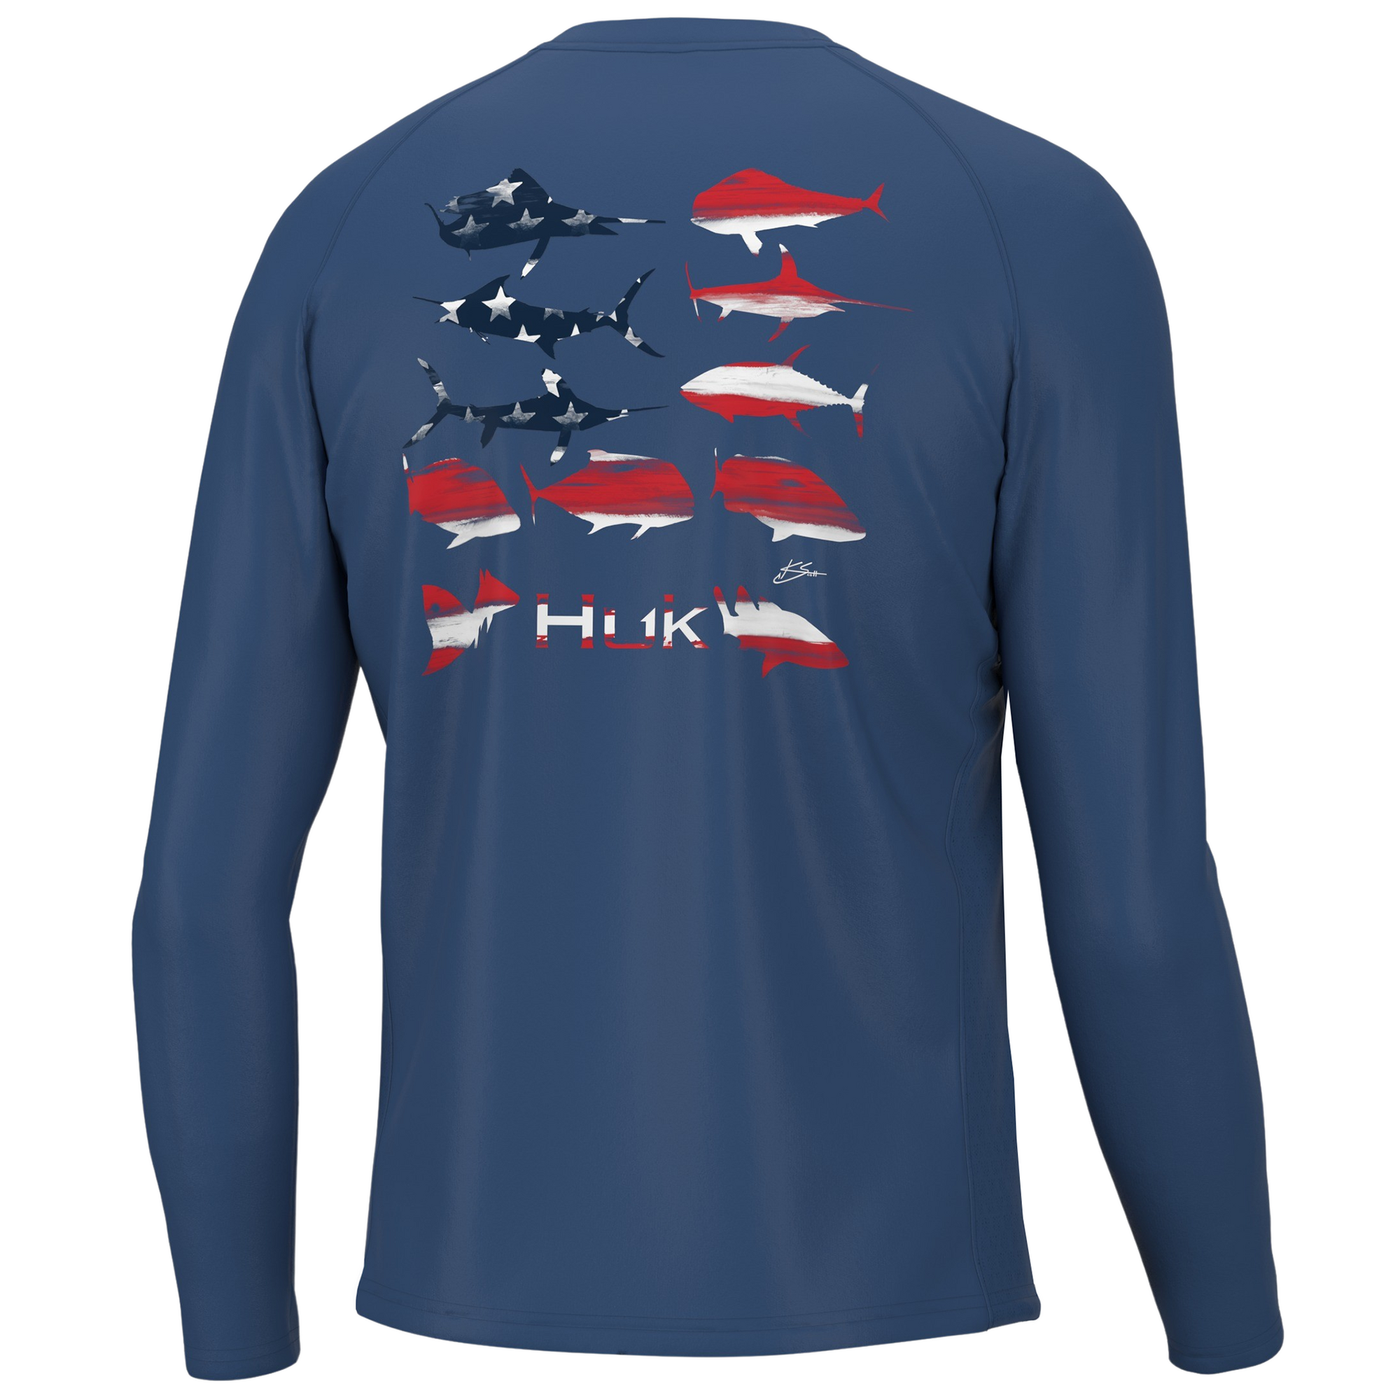 Huk Outfitter Pursuit Long Sleeve Shirt - Melton Tackle